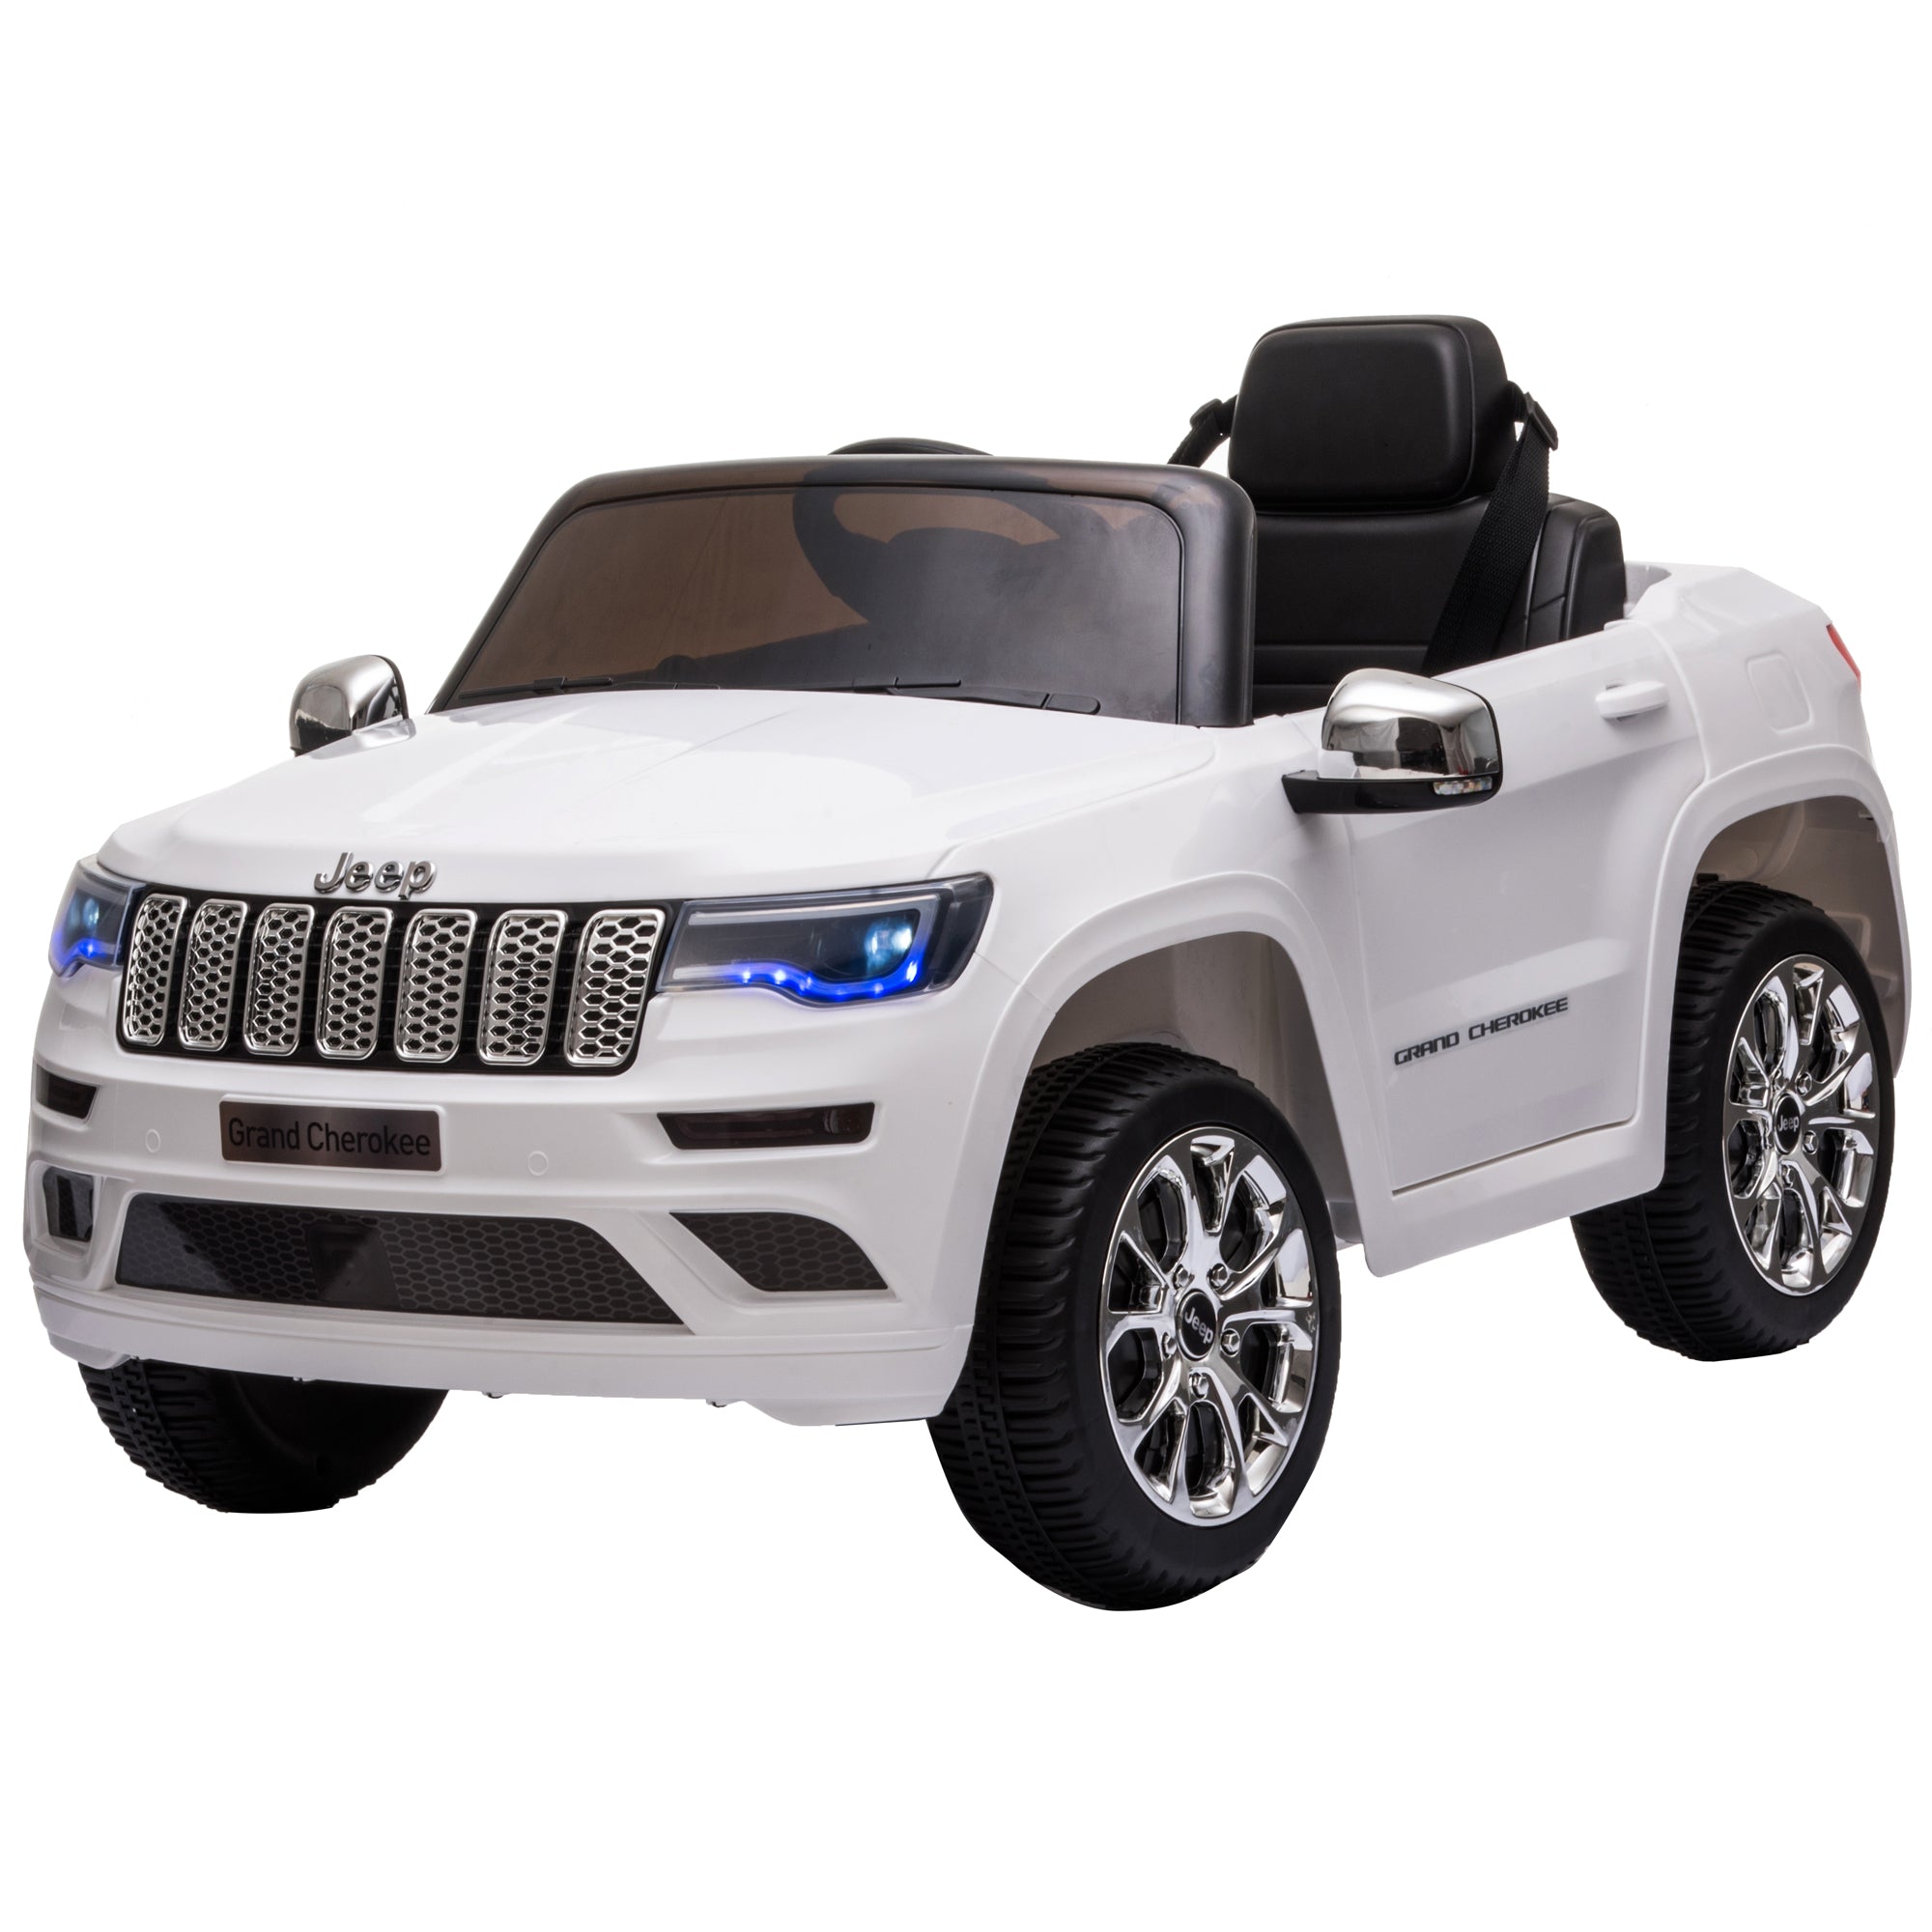 Shop online and get the all new Daymak Jeep Grand Cherokee – Ebike Universe